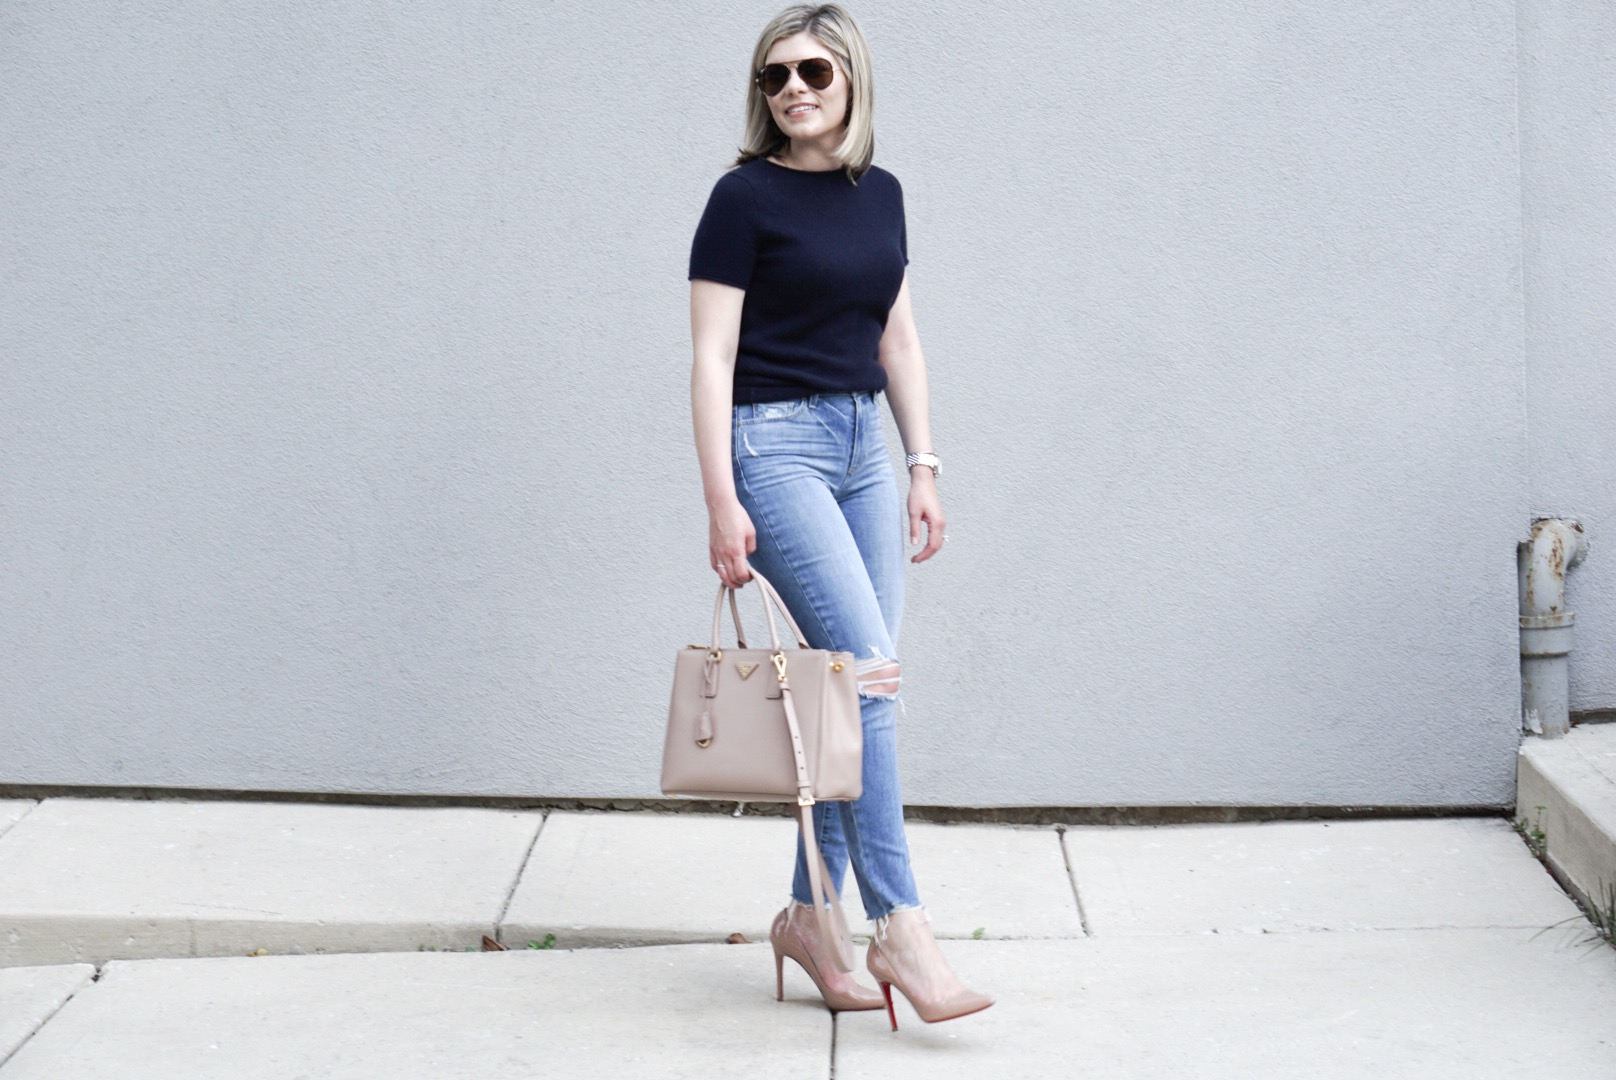 Summer to Fall Transitional Outfit - Cashmere & Jeans